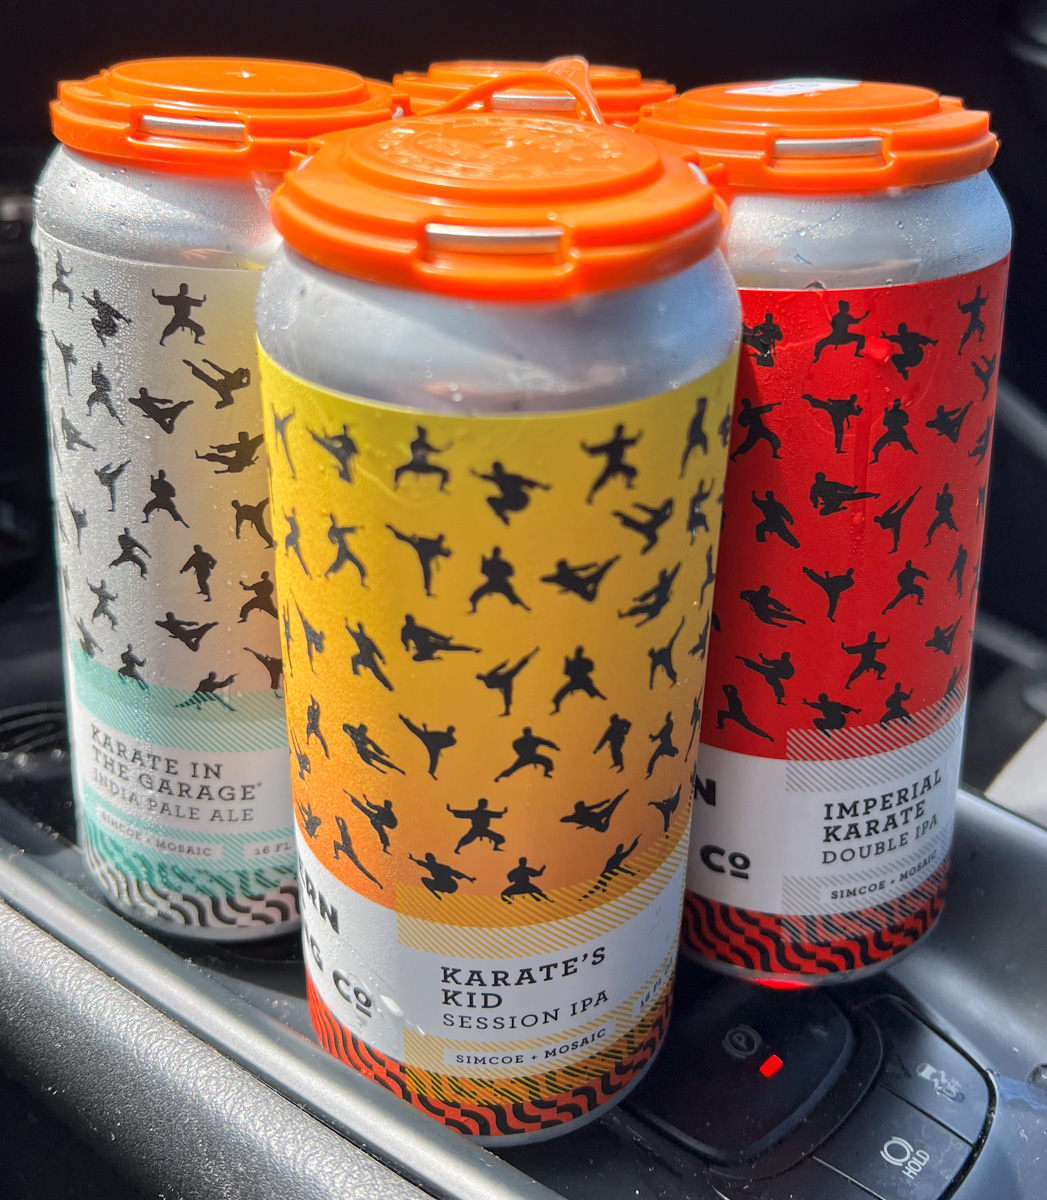 Karate Day 4-Pack - Southern Swells Brewing Co. | ViewFromALove